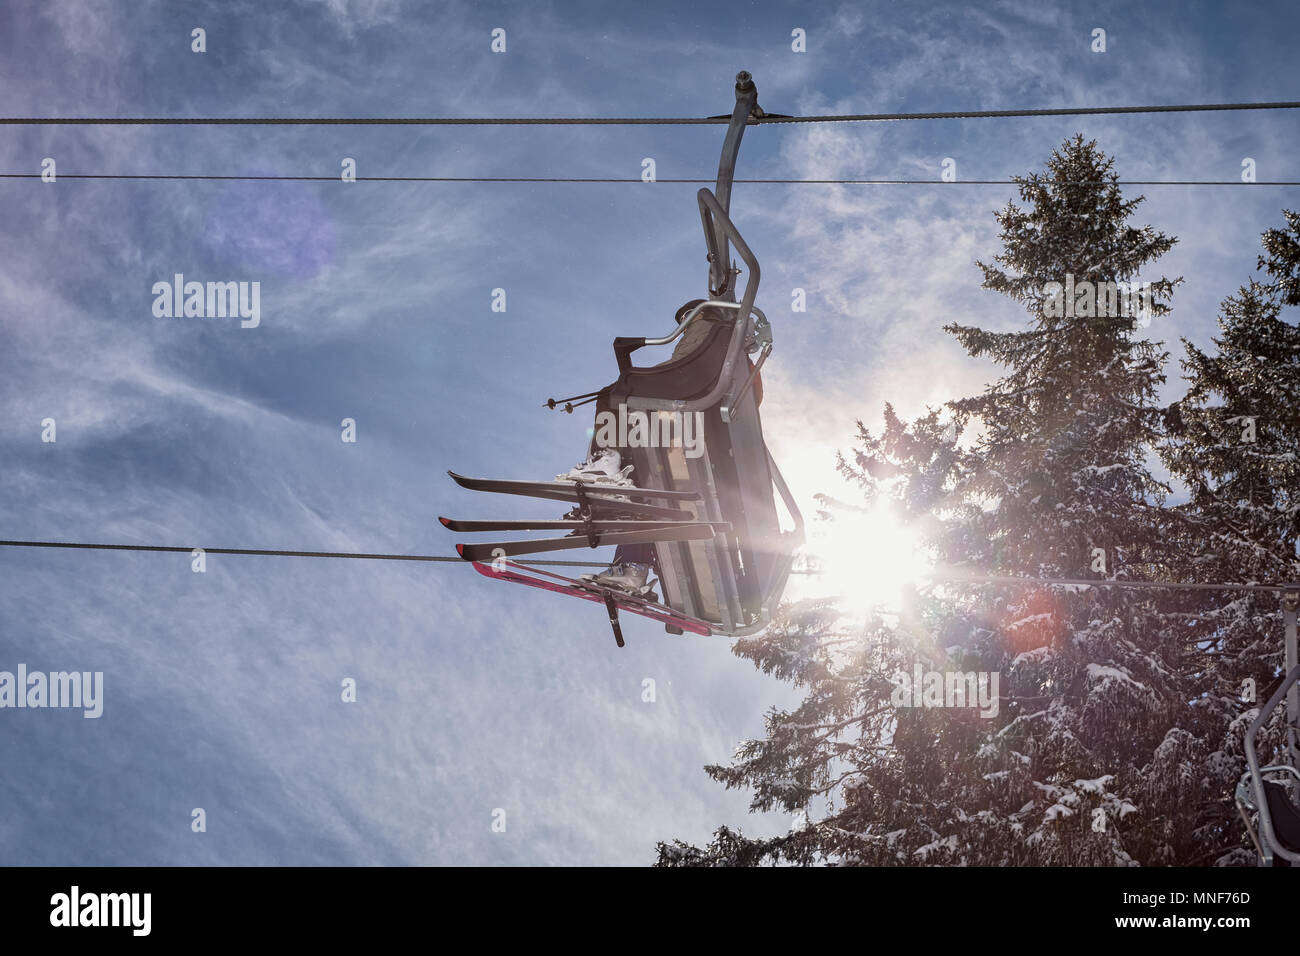 Skier in a chairlift Stock Photo